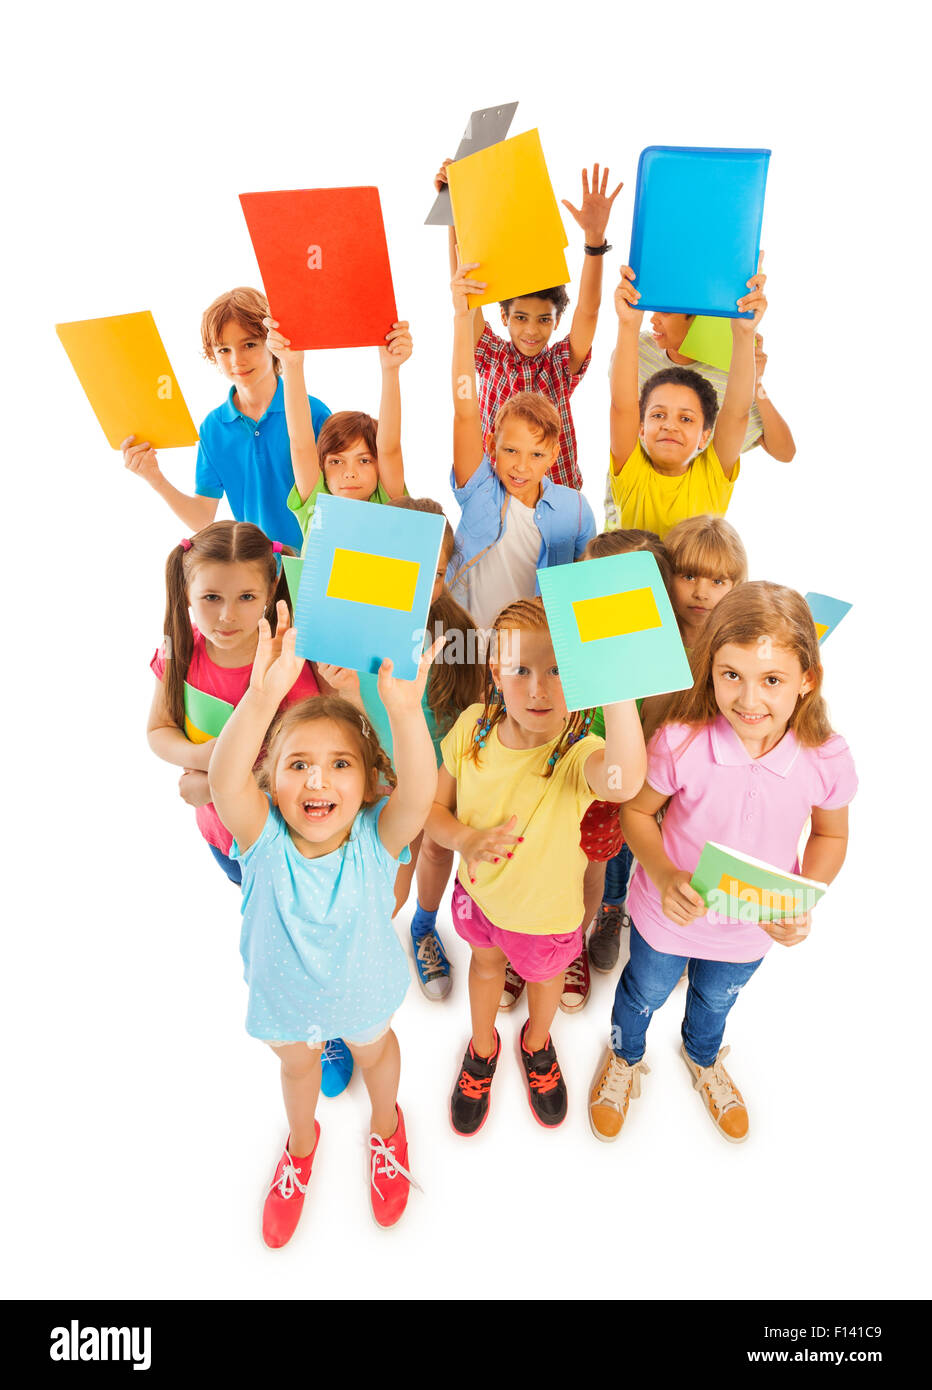 Eight years old kids lifting textbooks Stock Photo